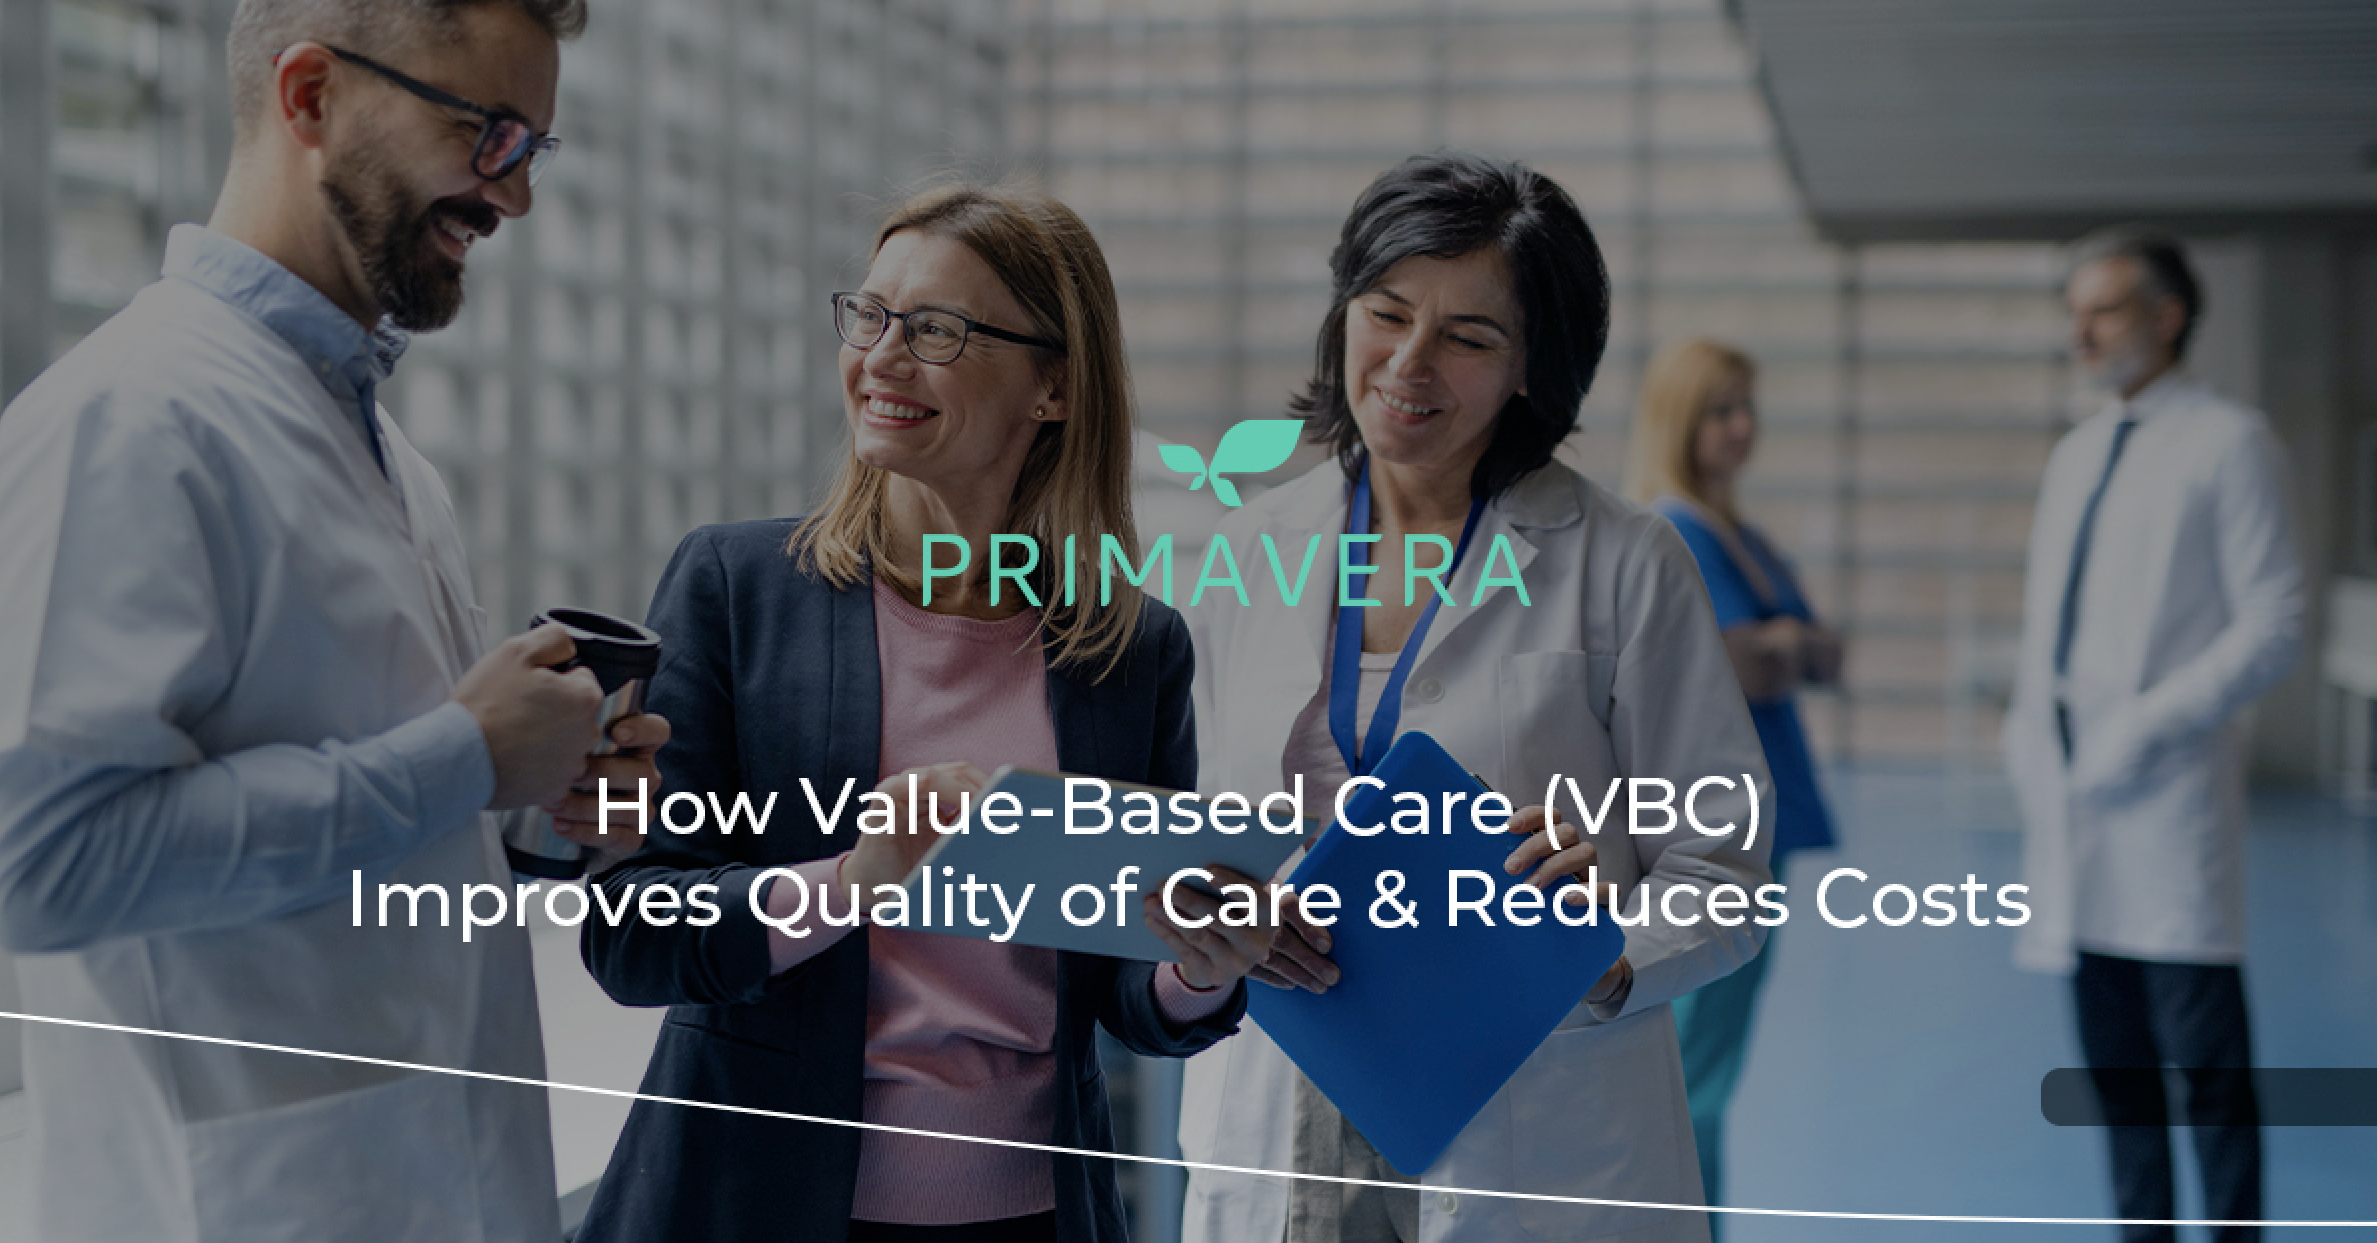 How Value-Based Care (VBC) Improves Quality of Care & Reduces Costs